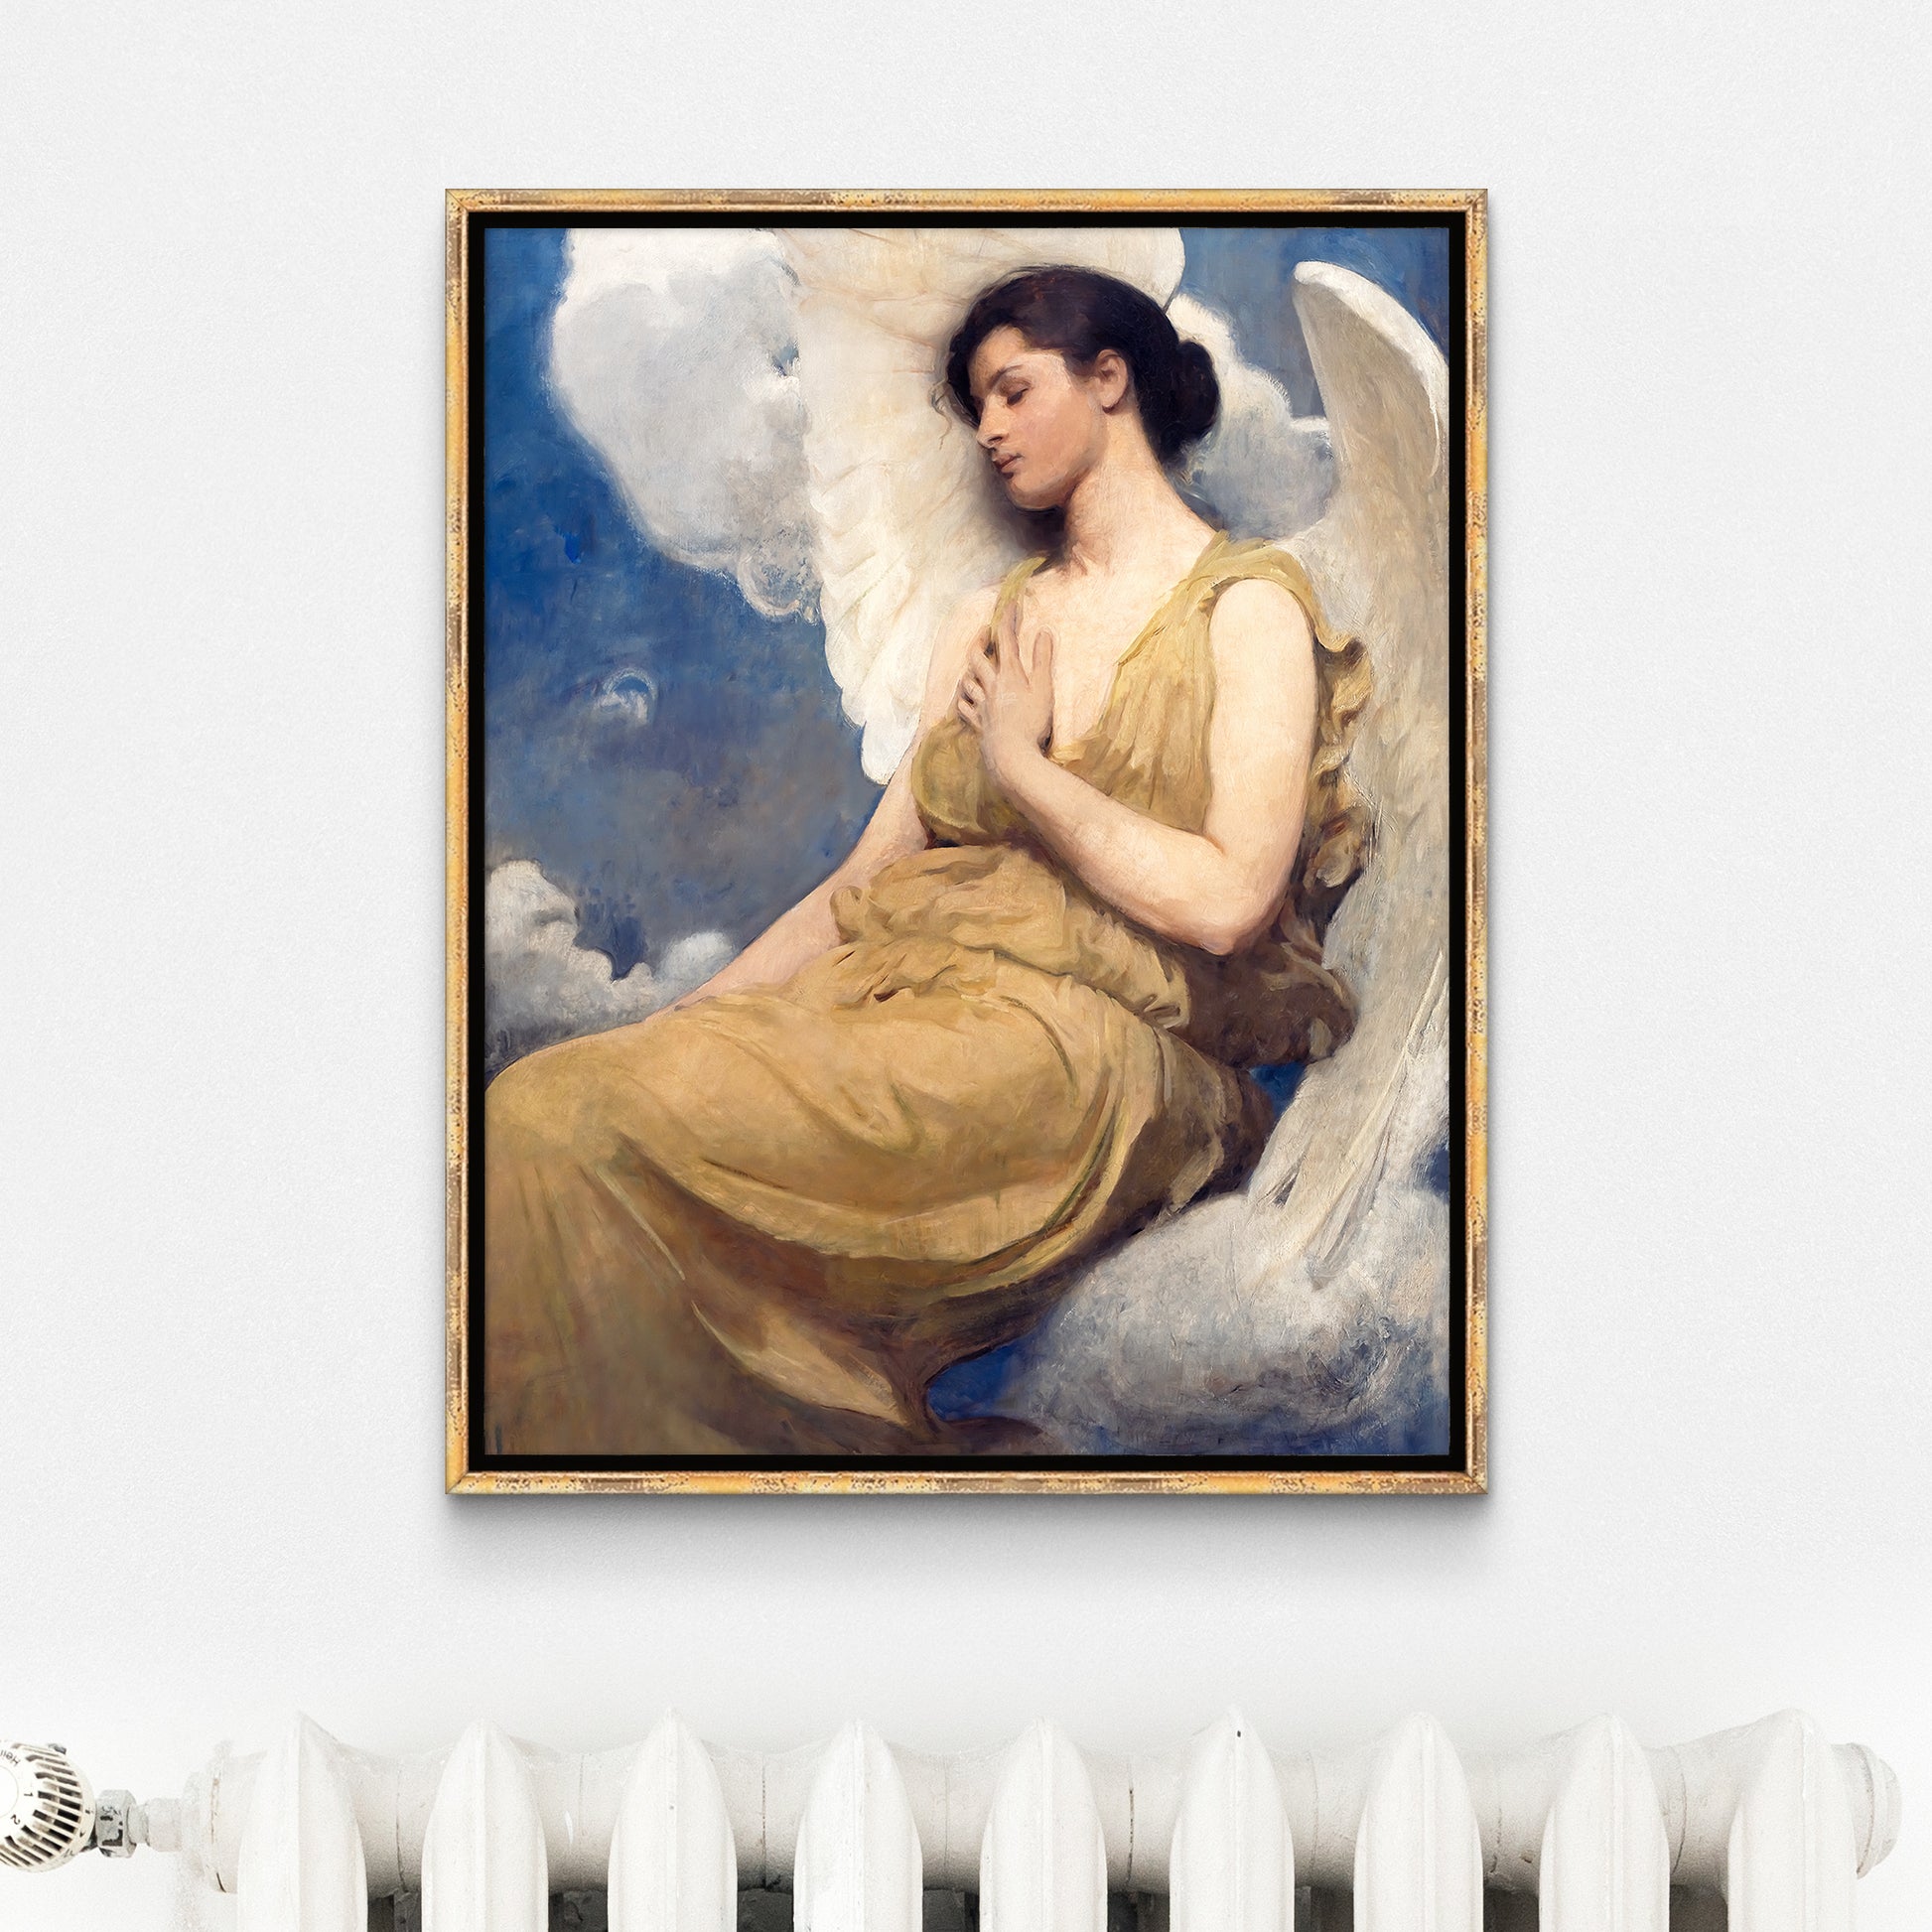 Be inspired by our classic art print Winged Figure by Abbott Handerson Thayer. This artwork was printed using the giclée process on archival acid-free paper and is presented in a golden vintage frame that captures its timeless beauty in every detail.